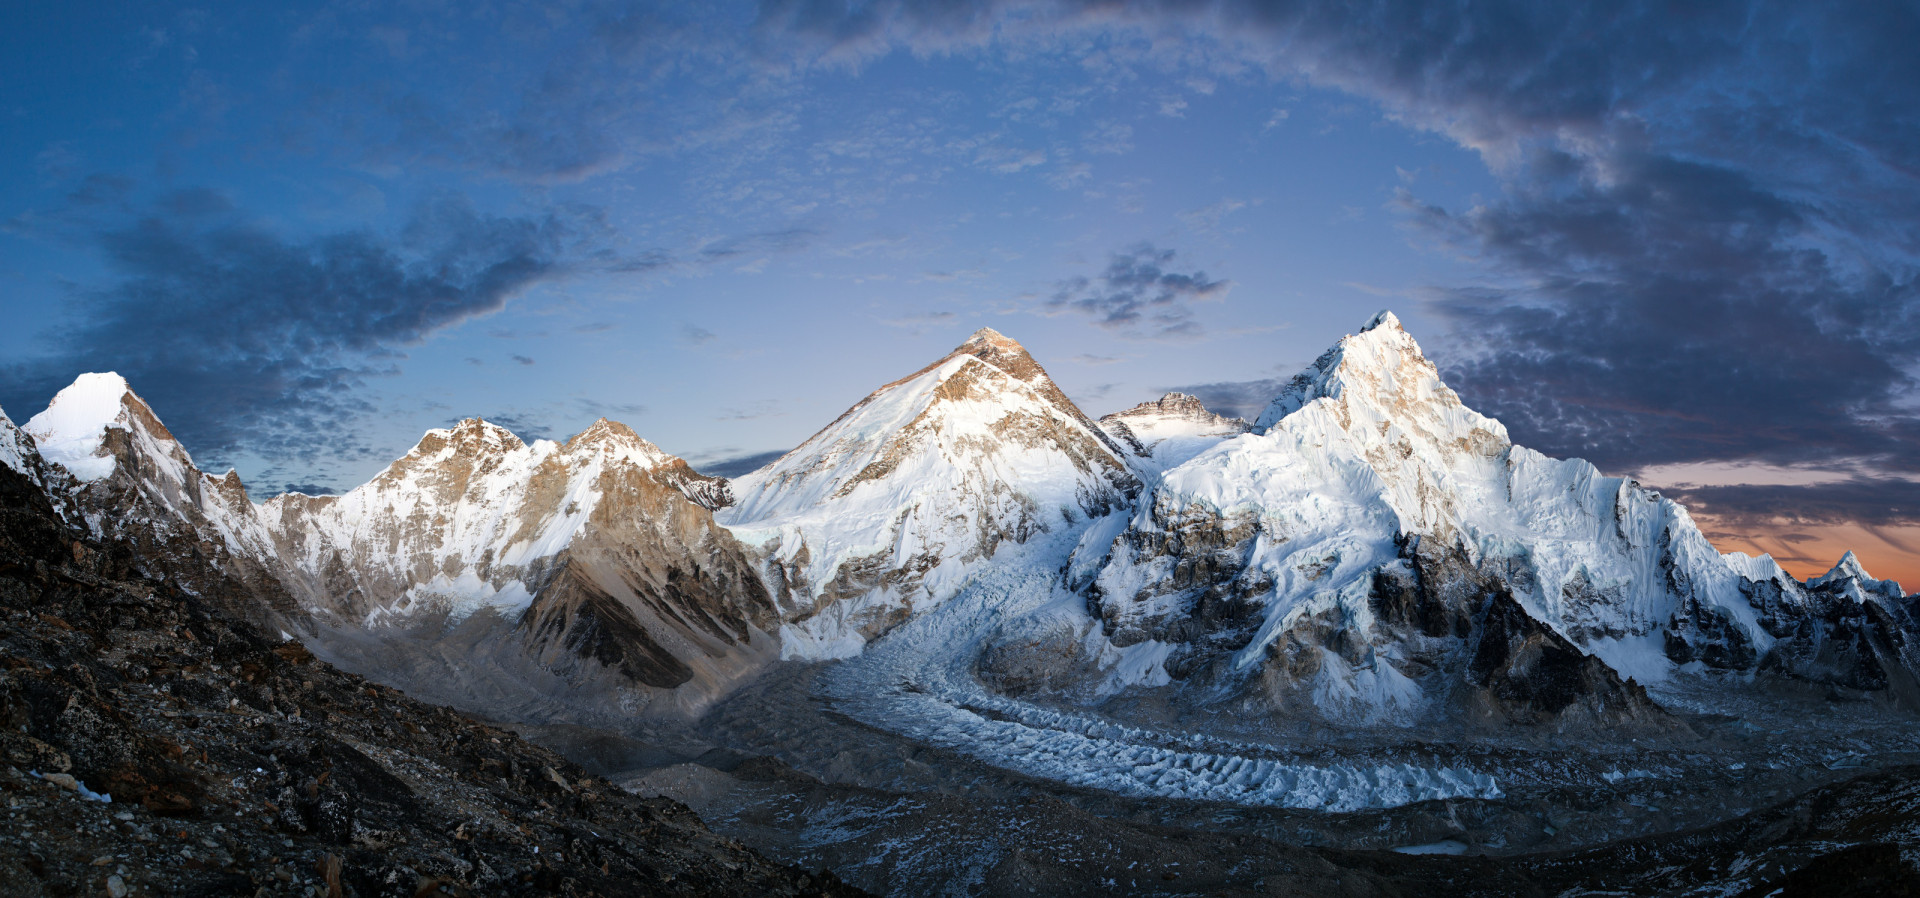 <p>Due to environmental and safety concerns, climbing restrictions on Everest are being imposed. These measures aim to preserve the mountain's delicate ecosystem and ensure the safety of climbers on this challenging and revered peak.</p><p><a href="https://www.msn.com/en-us/community/channel/vid-7xx8mnucu55yw63we9va2gwr7uihbxwc68fxqp25x6tg4ftibpra?cvid=94631541bc0f4f89bfd59158d696ad7e">Follow us and access great exclusive content every day</a></p>